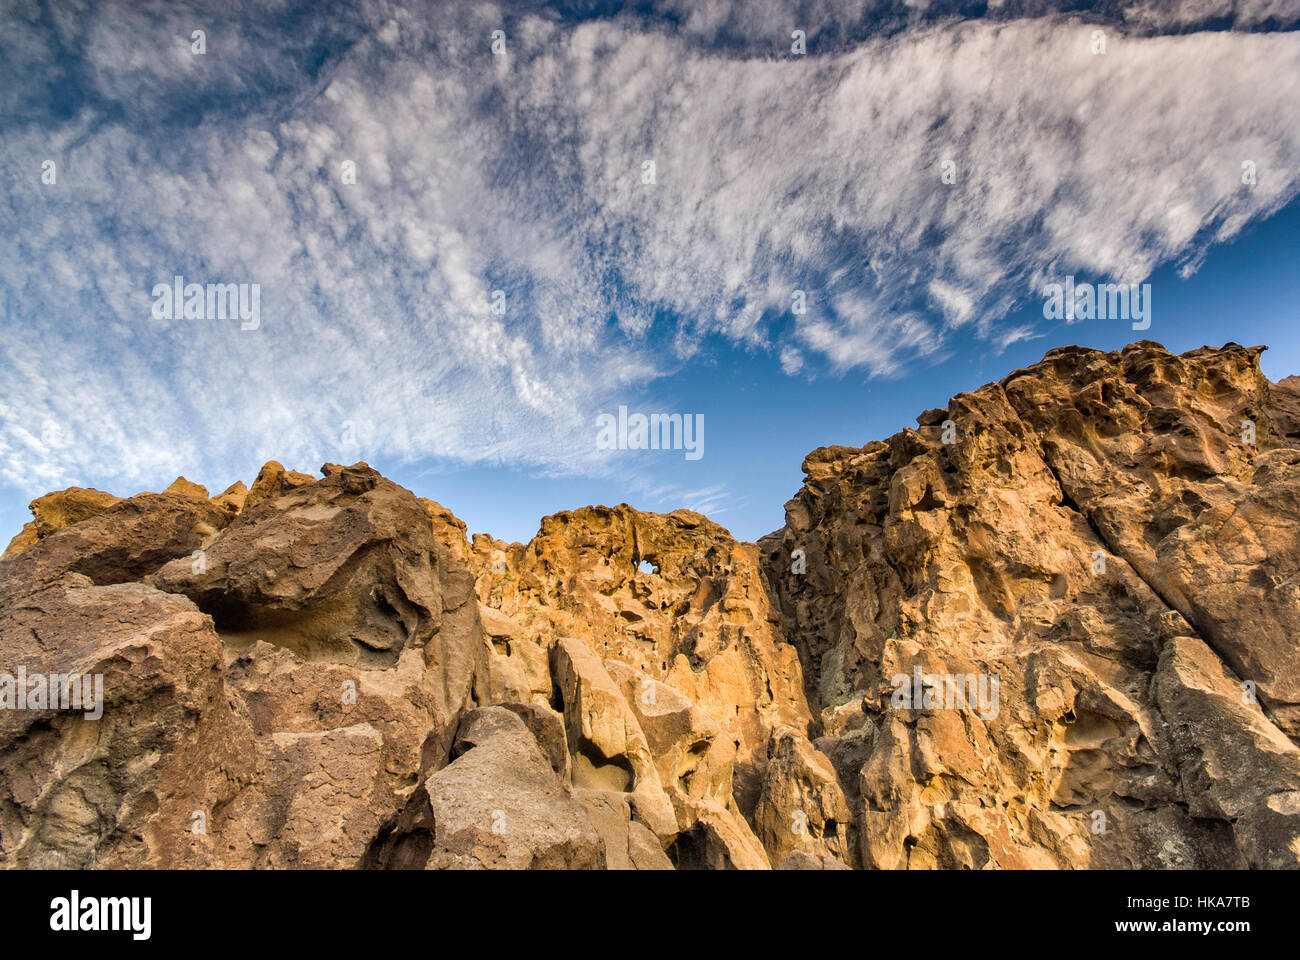 Cirrocumulus and cirrus clouds over Hole-in-the-Wall rocks at Mojave National Preserve, California, USA Stock Photo